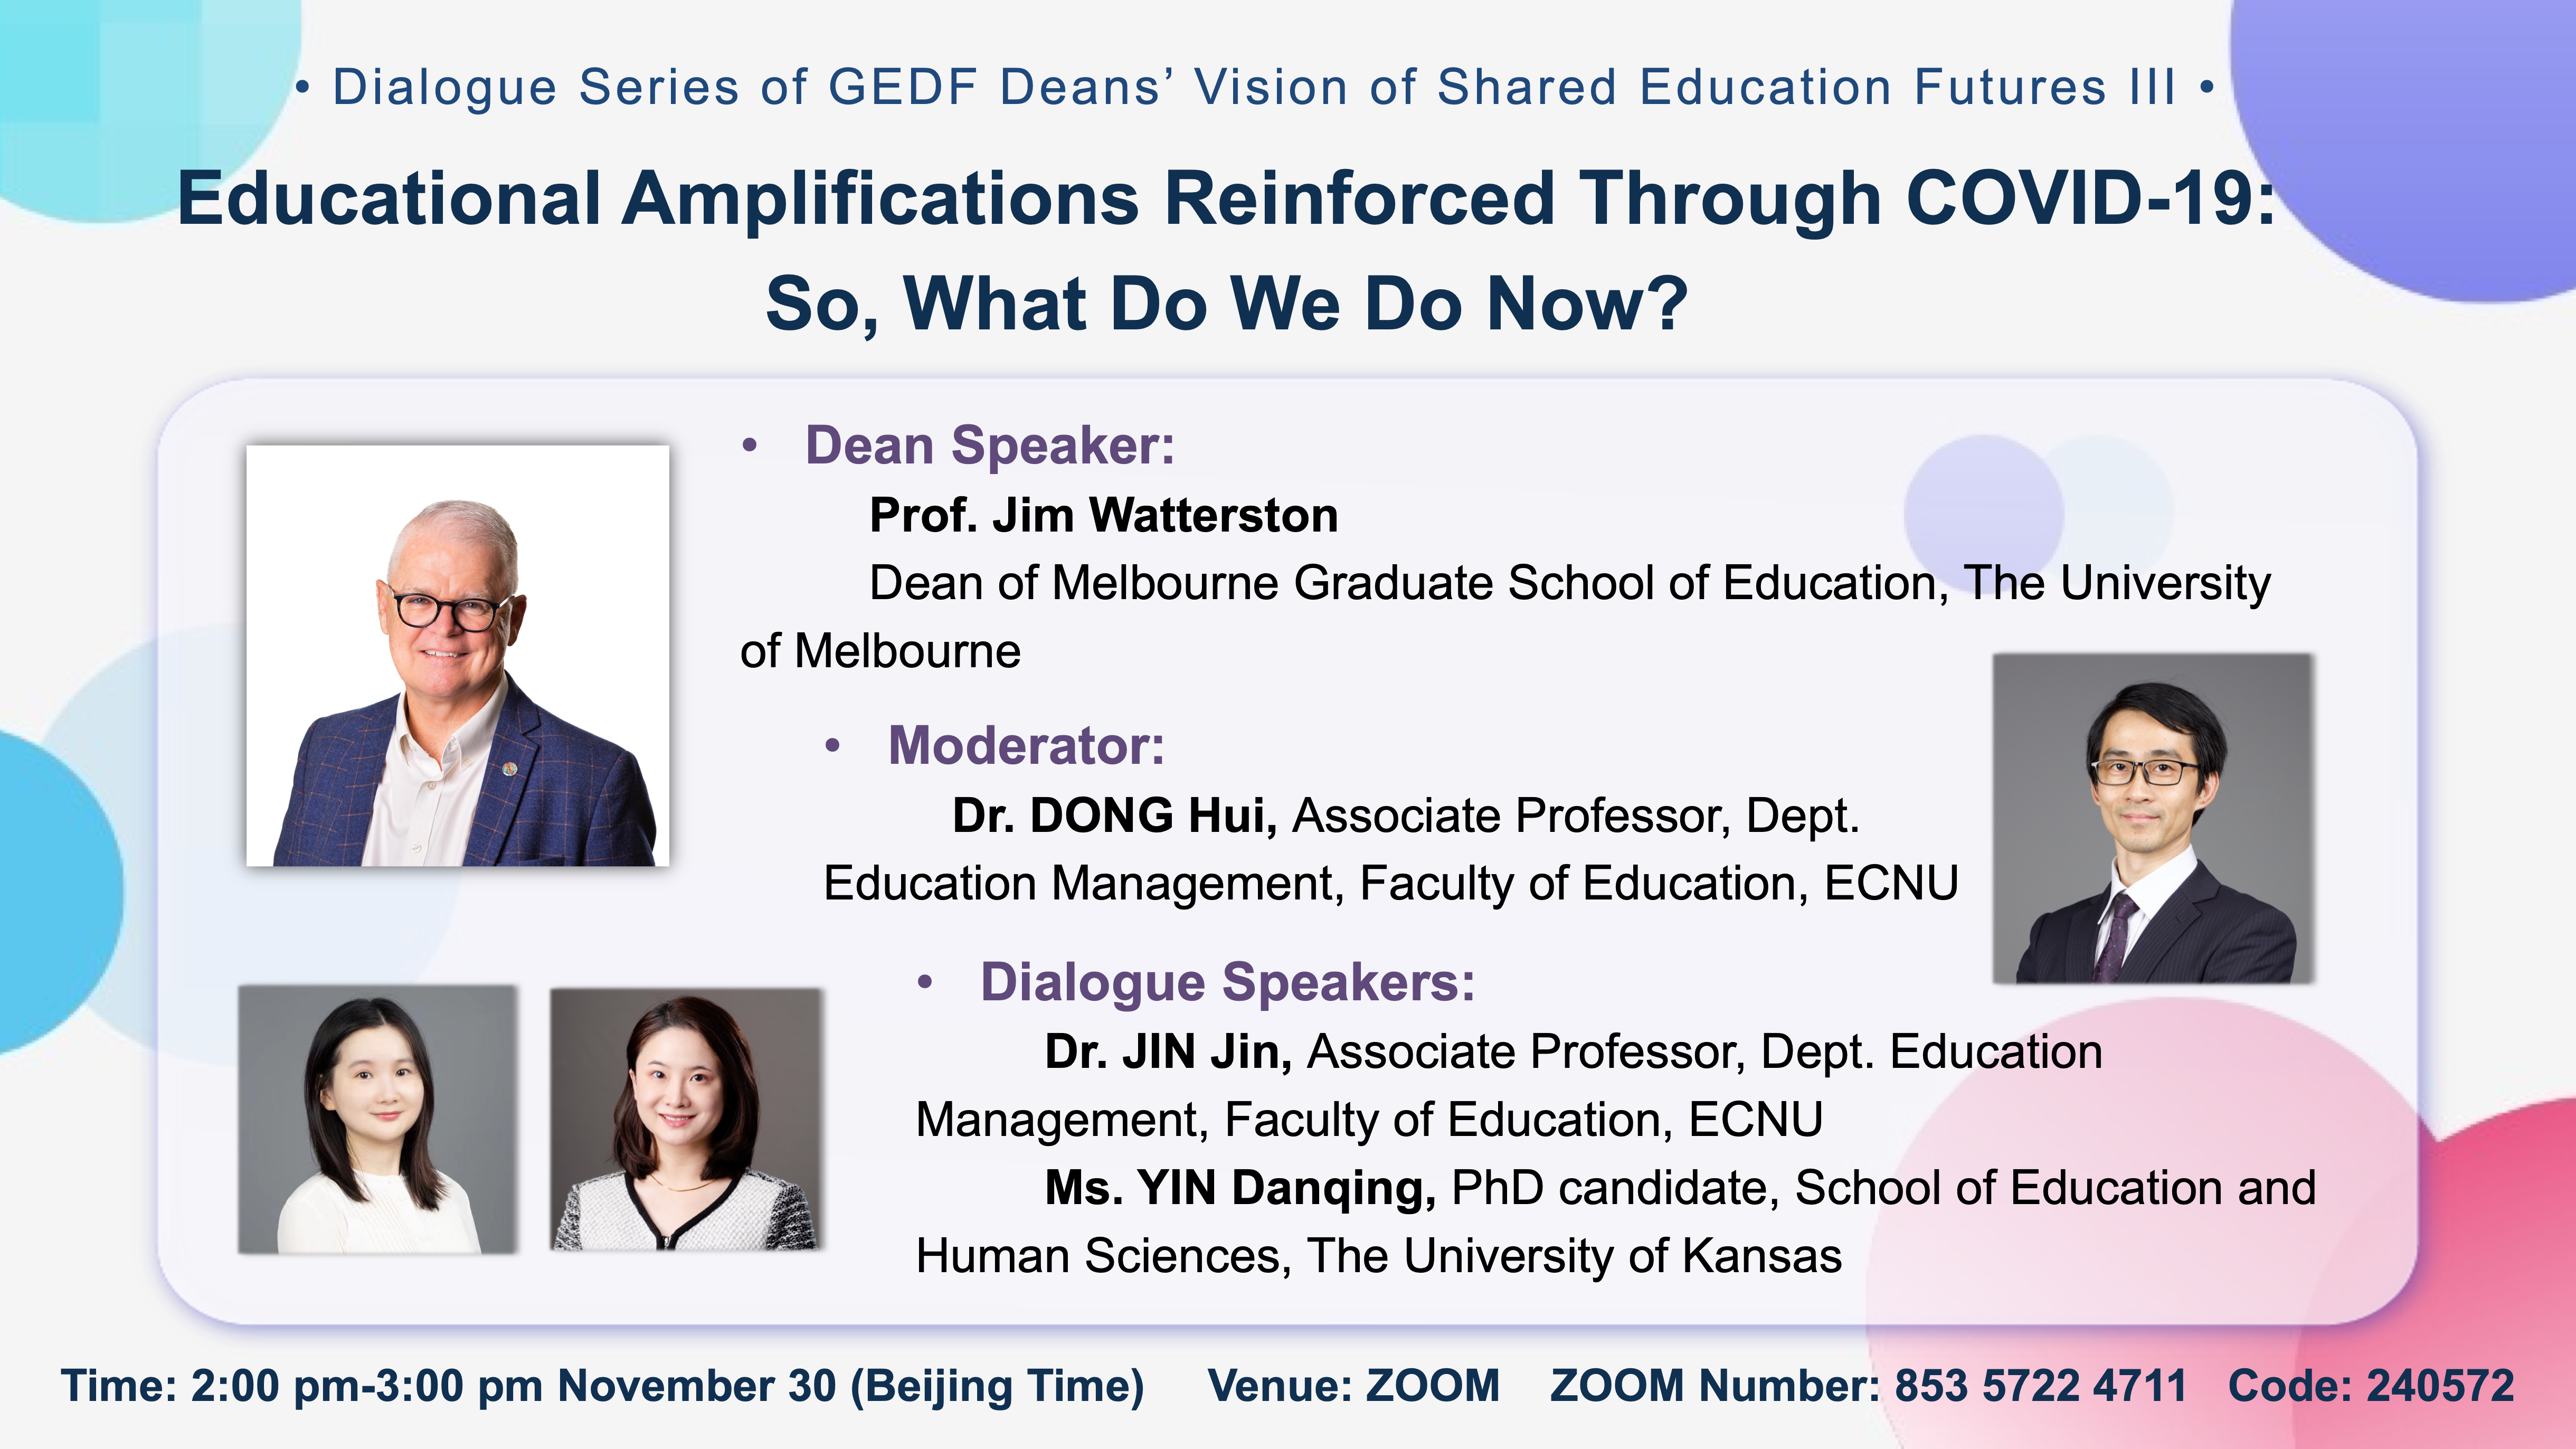 Dialogue Series of GEDF Deans’Vision of Shared Education Futures III